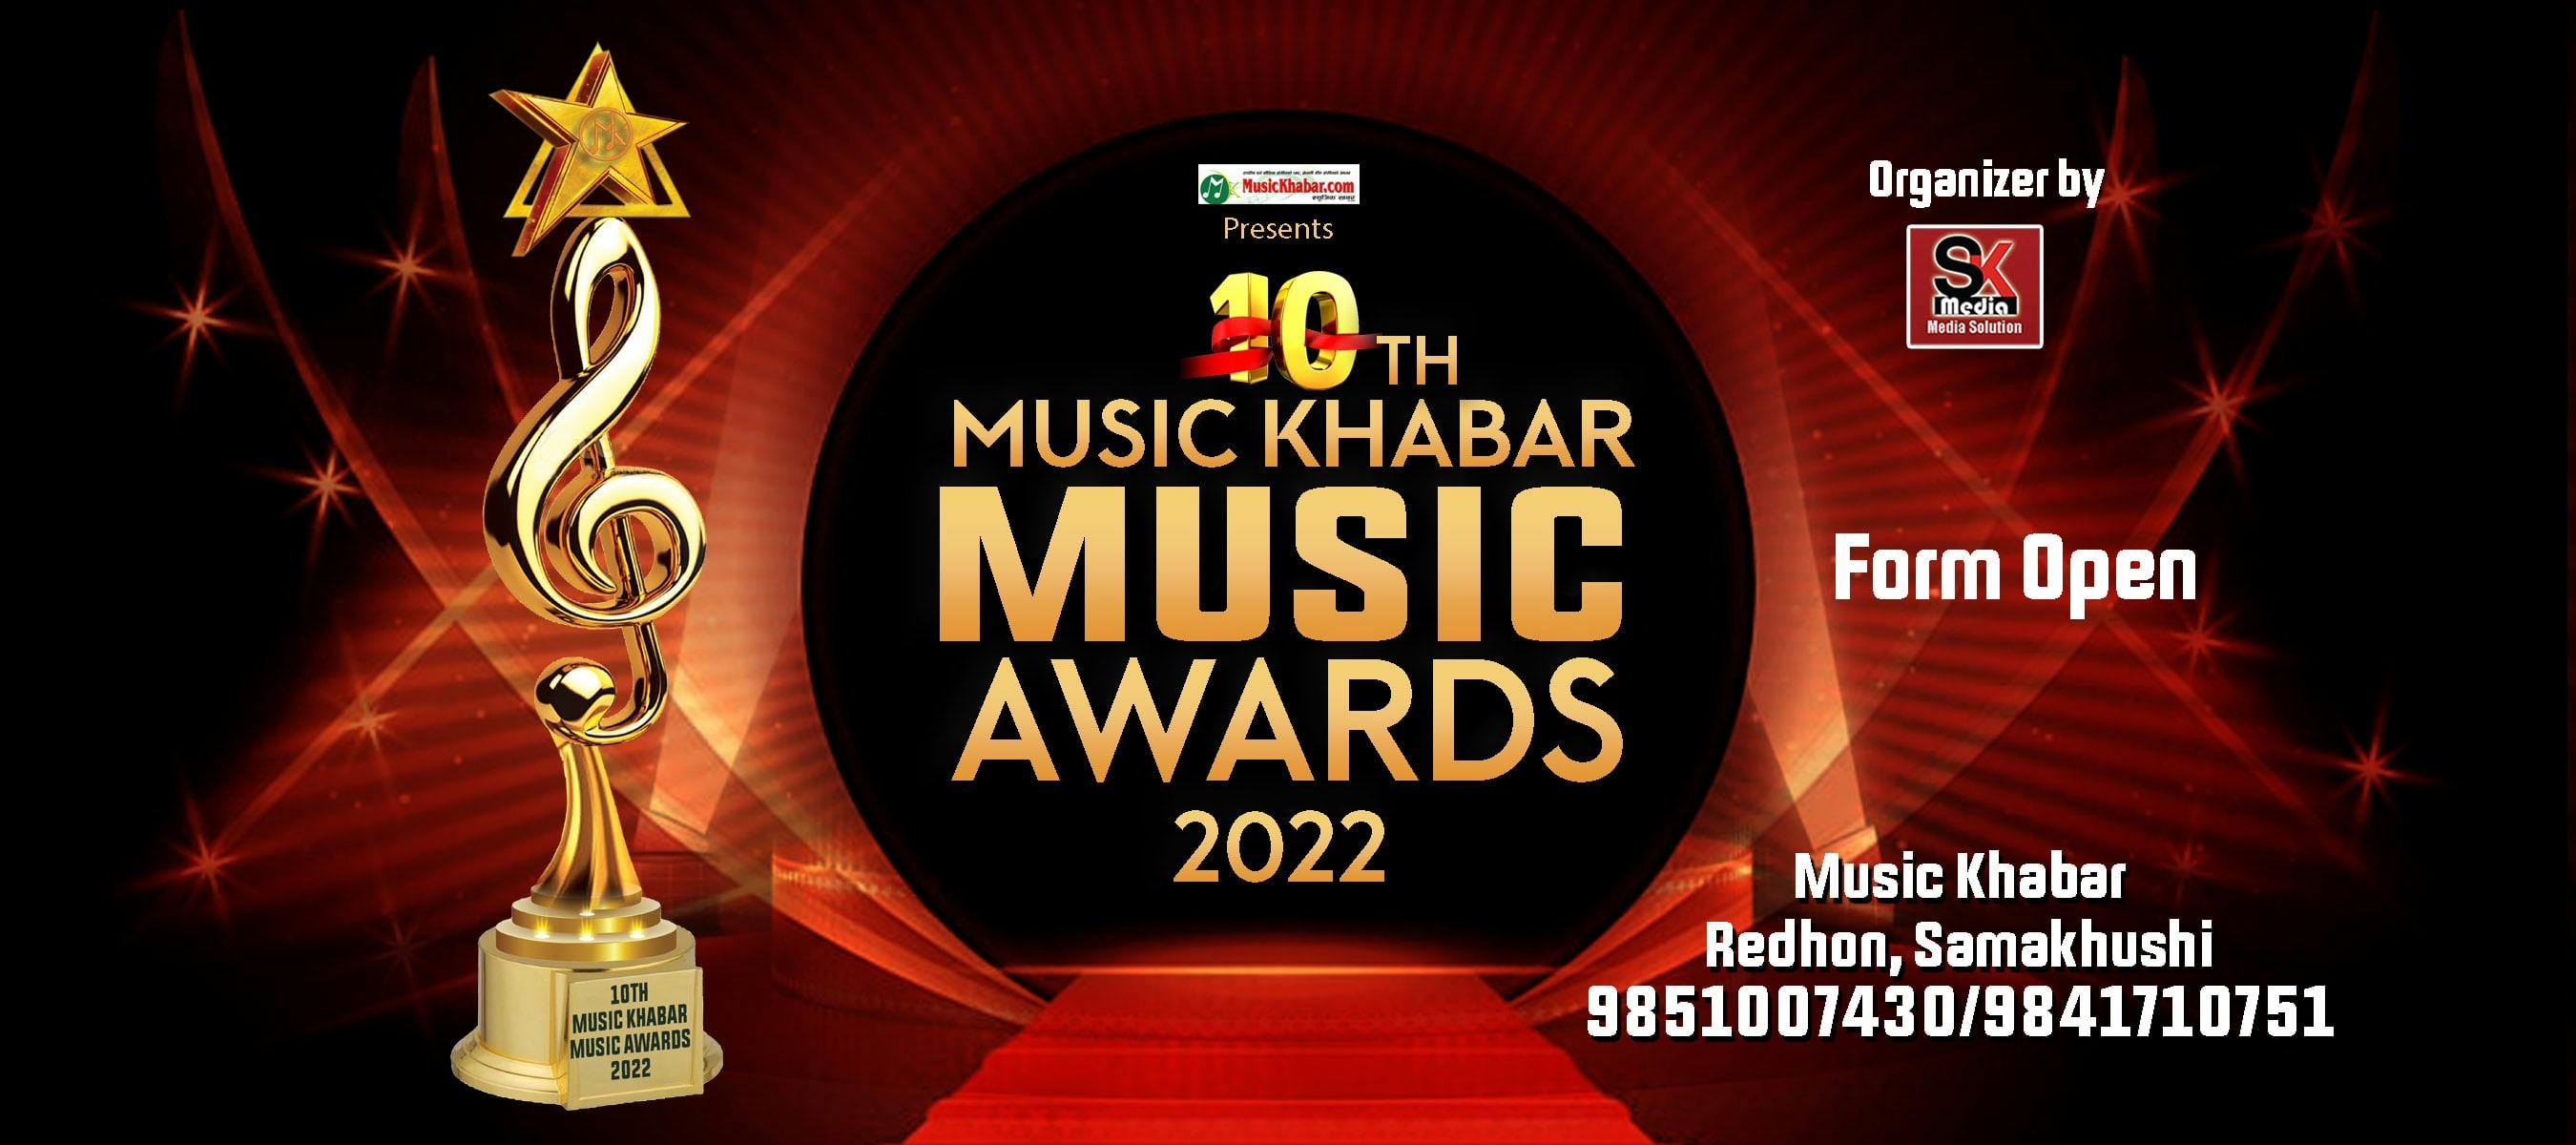 Applications for the 10th Music Khabar Music Awards are open